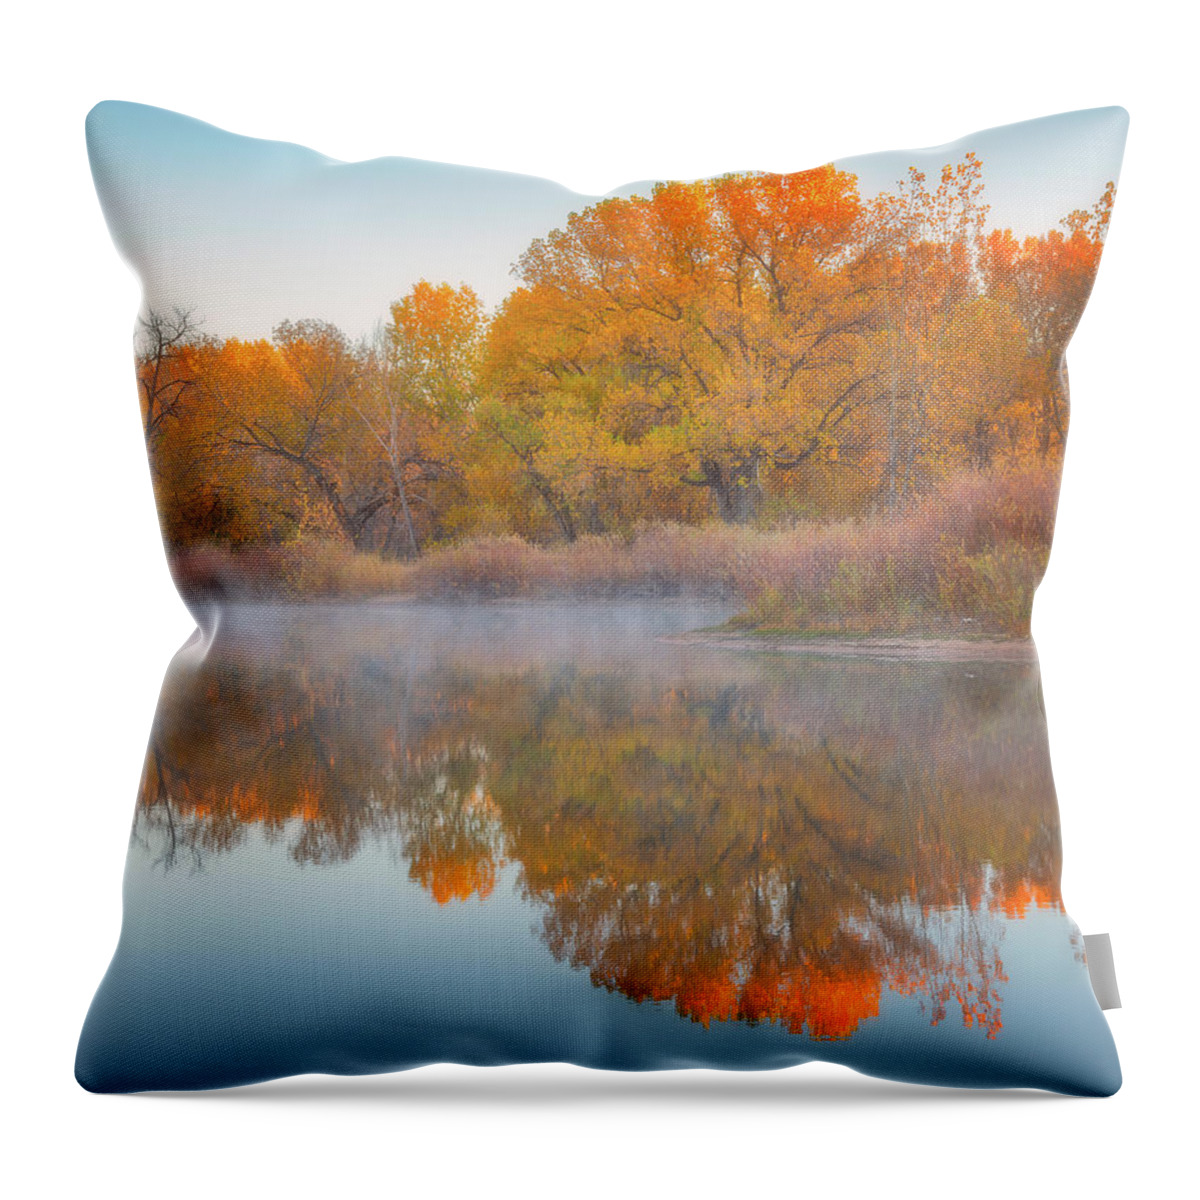 Reflections Throw Pillow featuring the photograph Autumn Reflections by Darren White